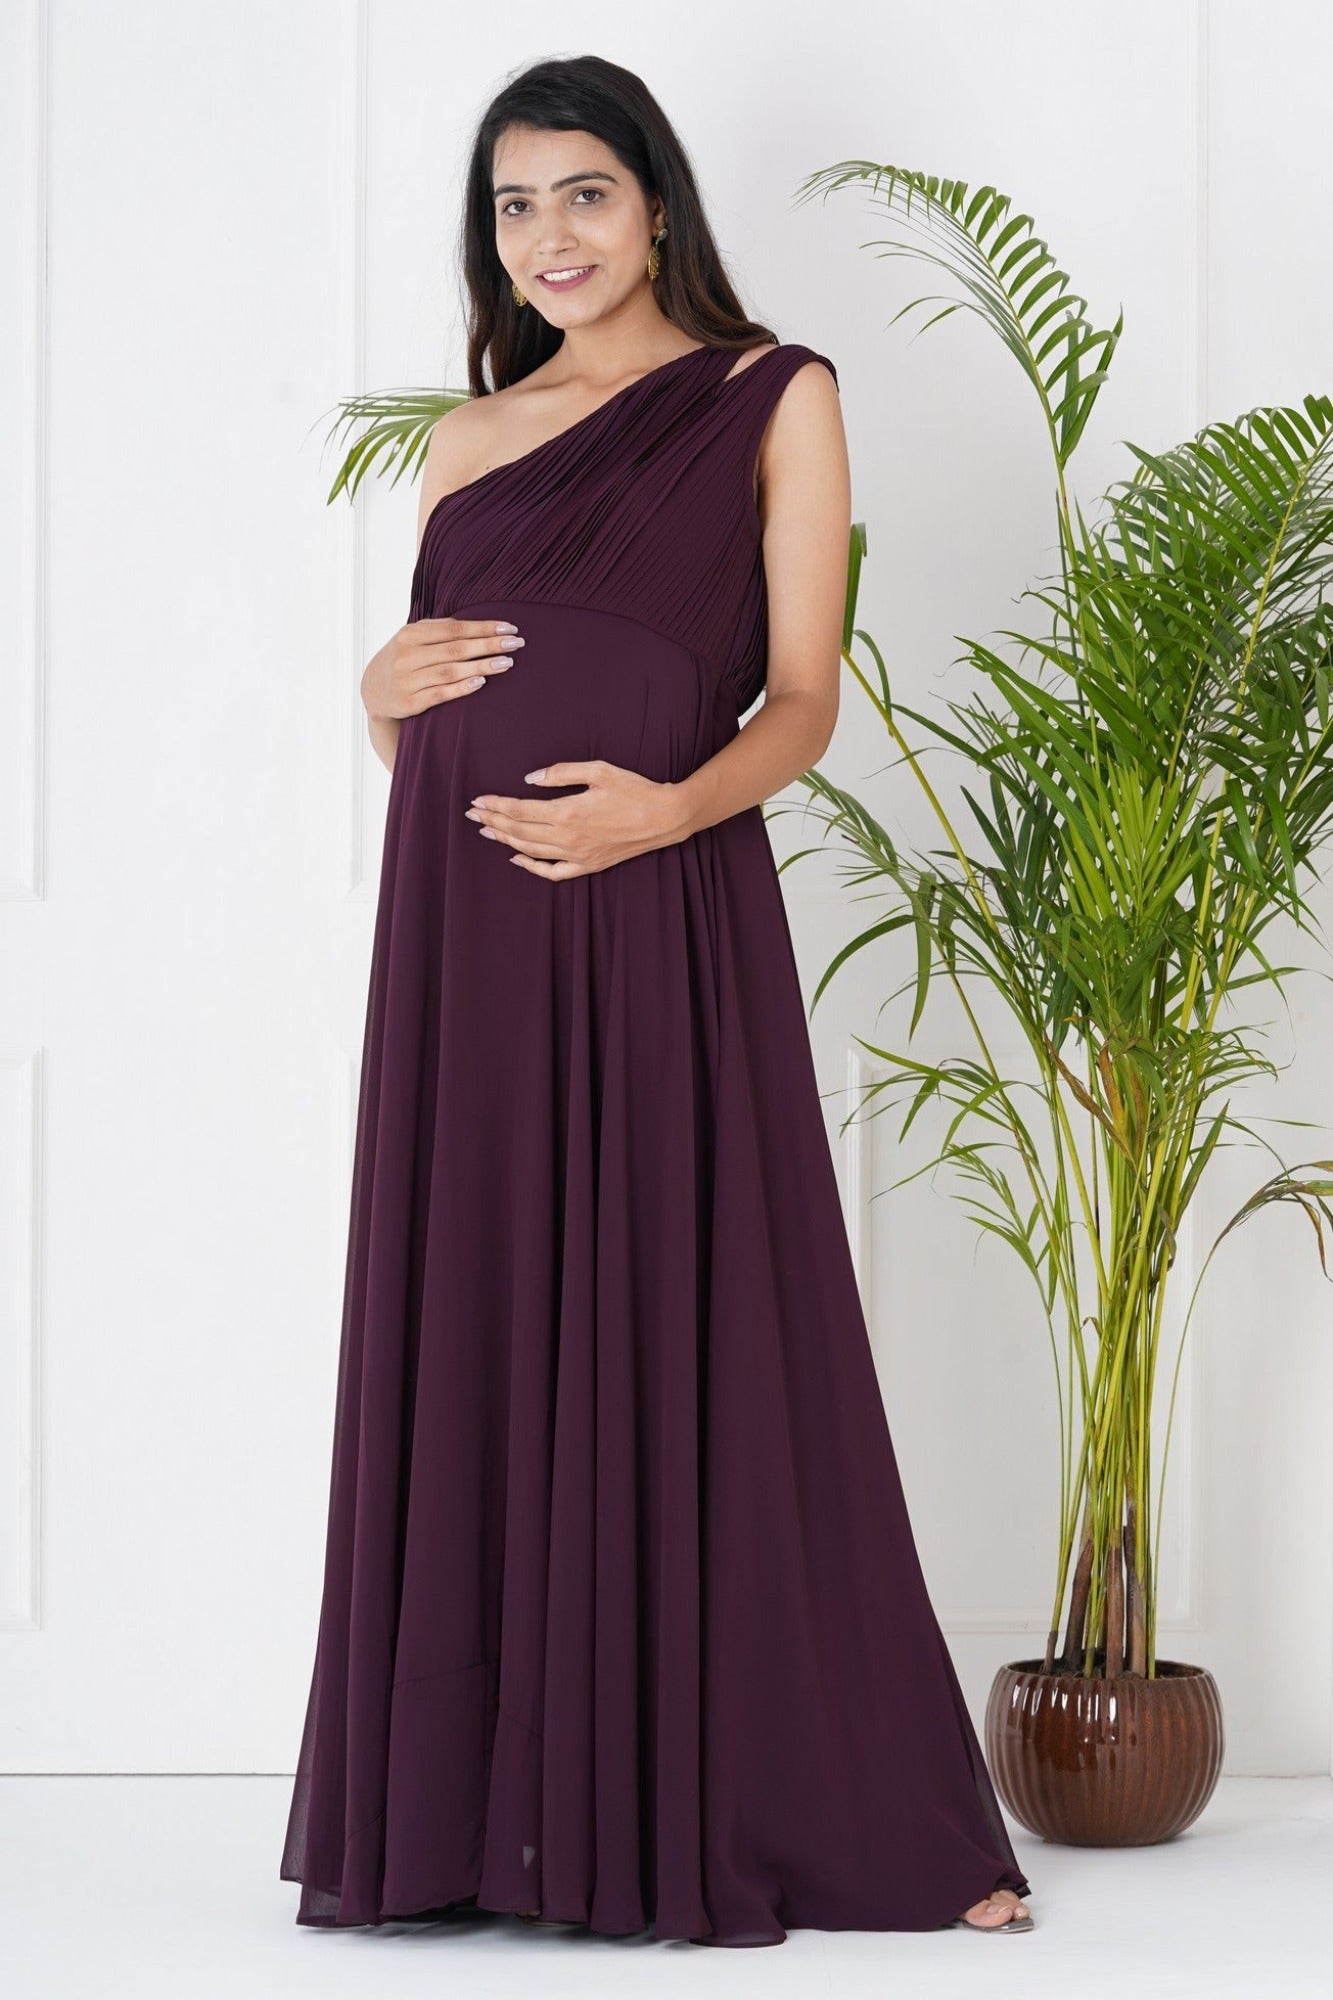 maternity dresses and gowns for photoshoot in india